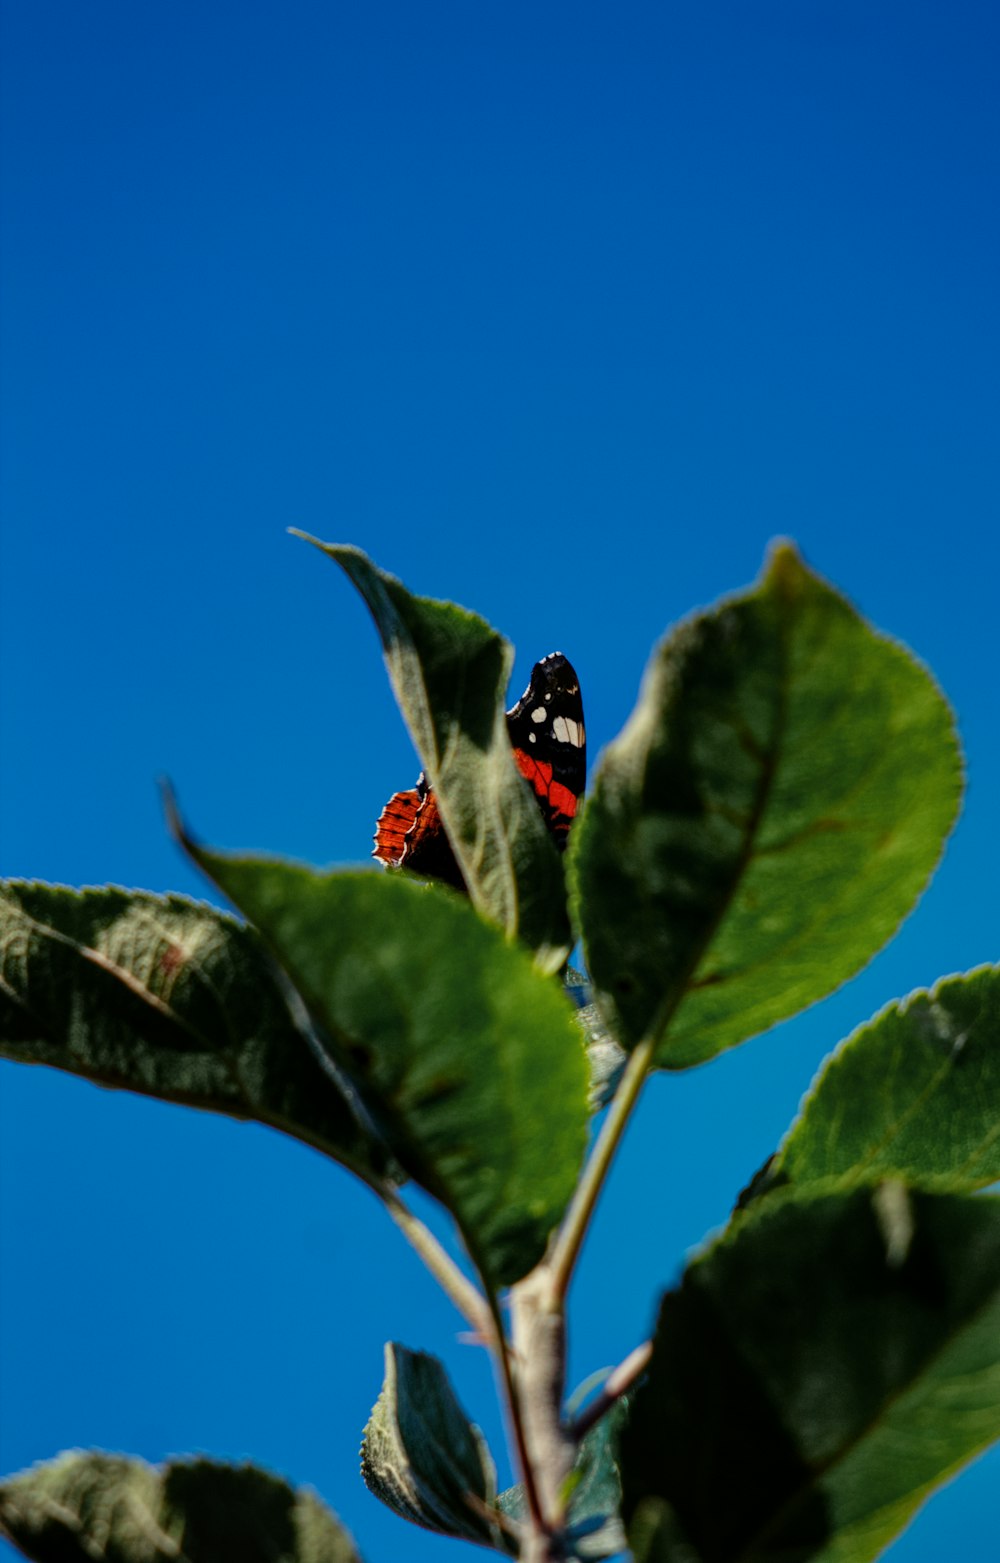 red and black butterfly perching on green leafed plant